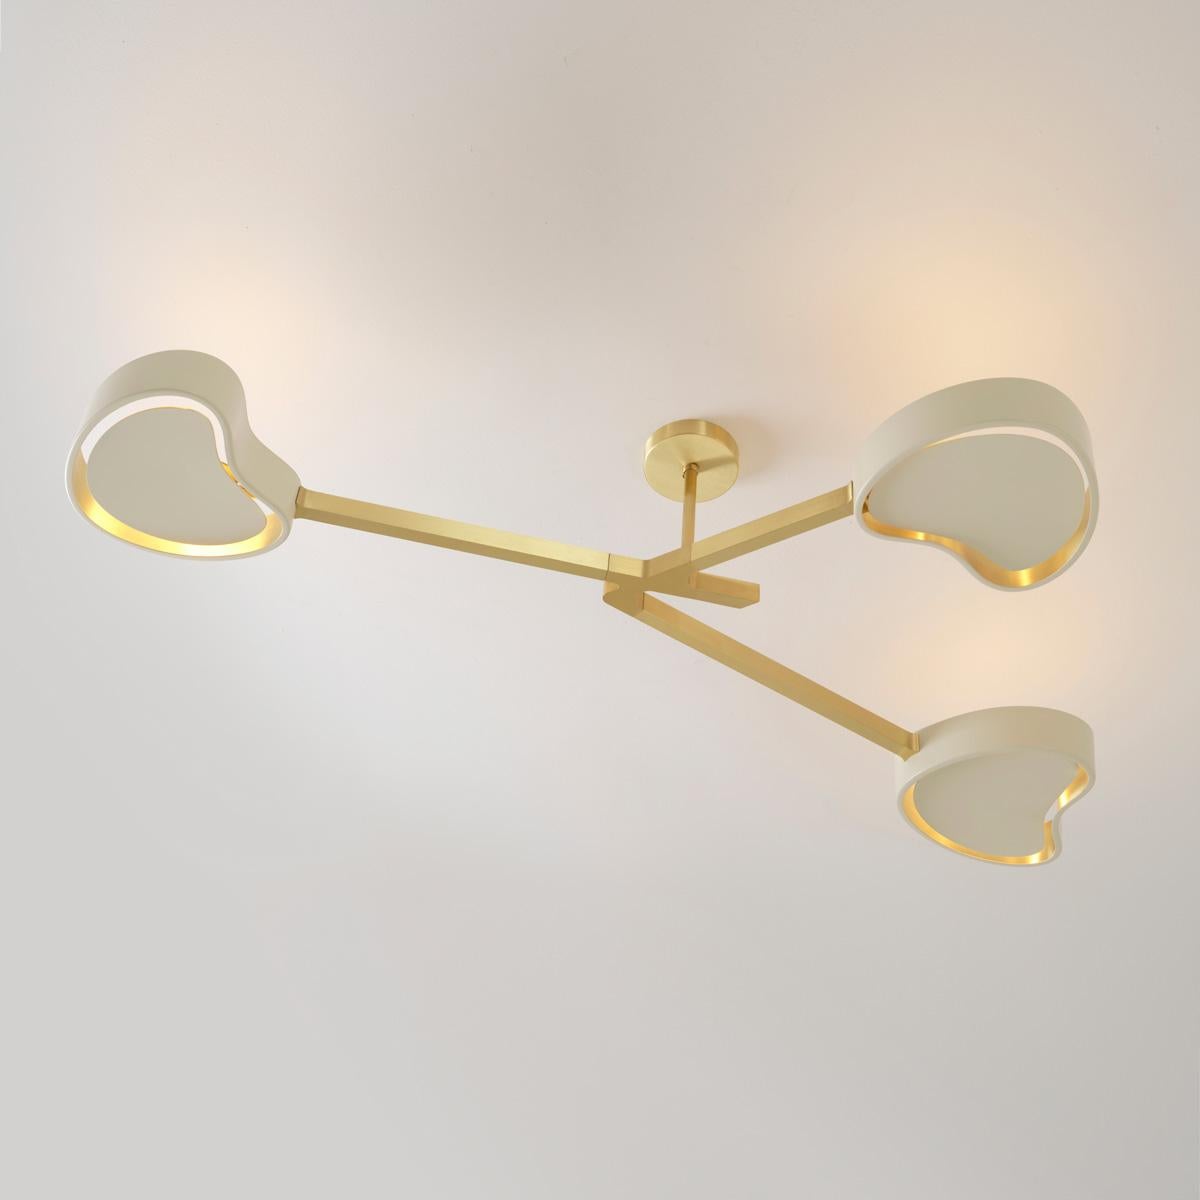 Cuore N.3 Ceiling Light by Gaspare Asaro. Bronze Finish For Sale 2